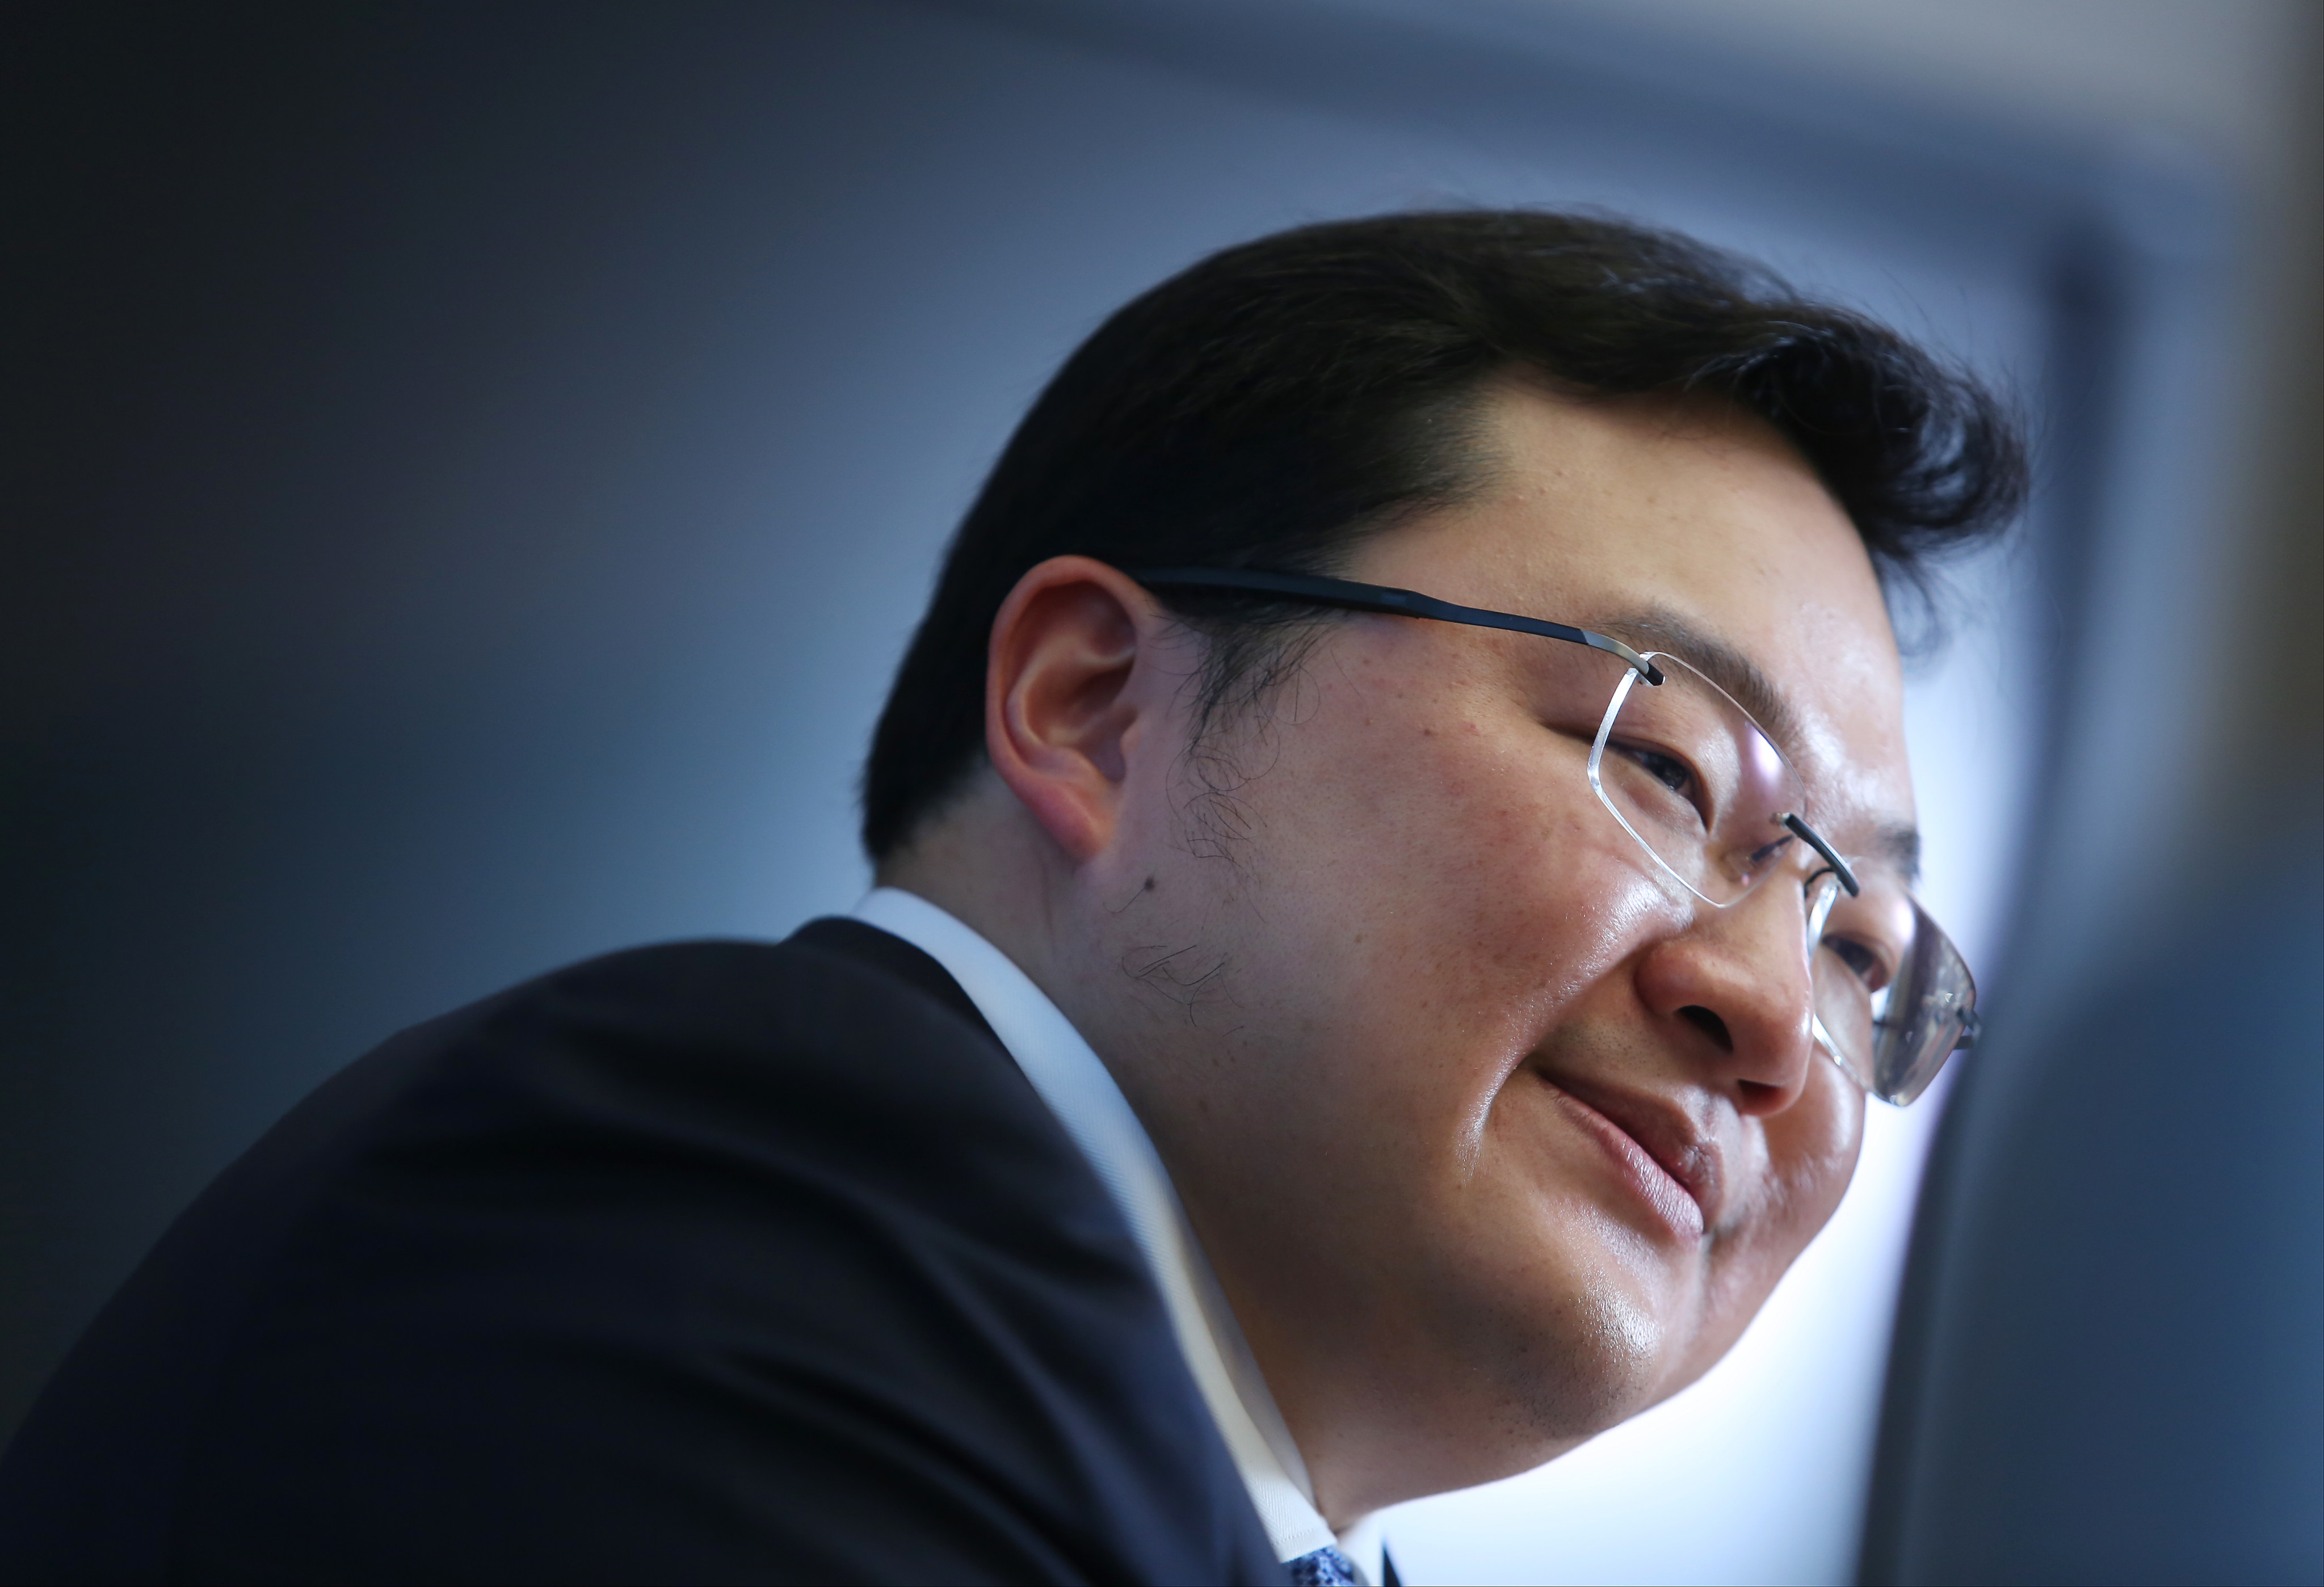 Jho Low has been sentenced for his involvement in the 1MDB scandal. Photo: SCMP